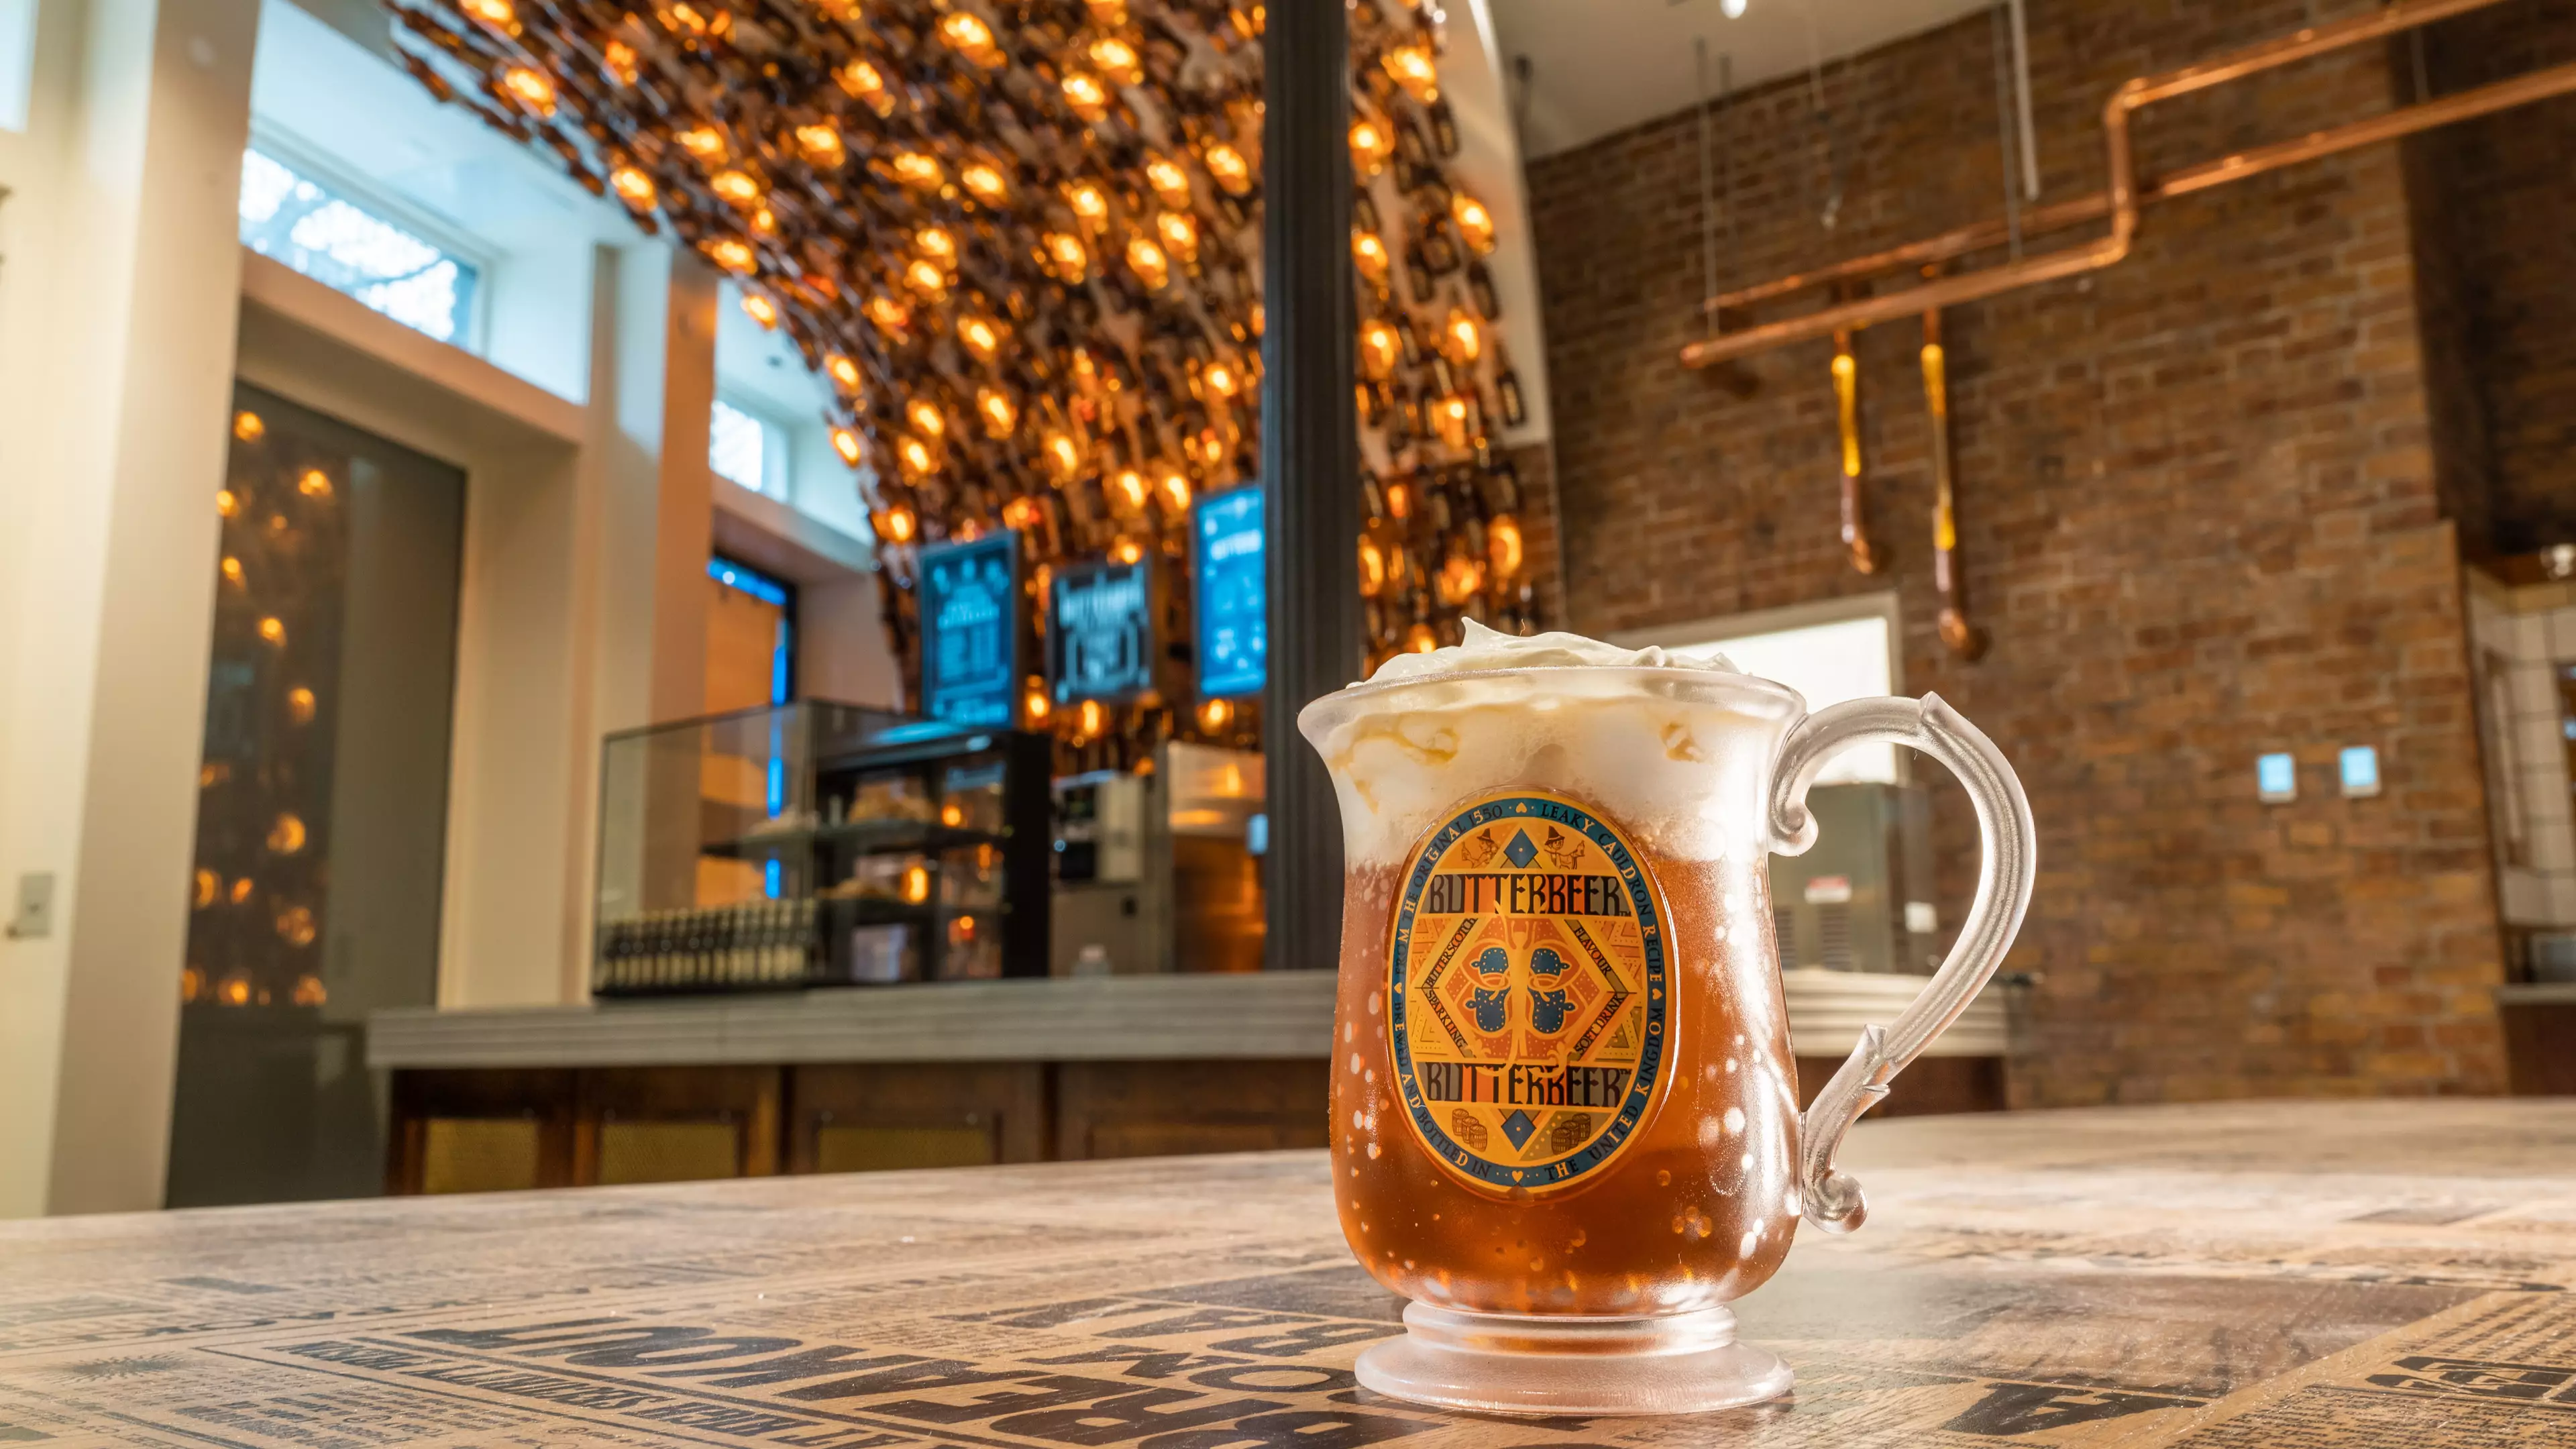 First Look At New Harry Potter Butterbeer Bar In New York's Mega Store